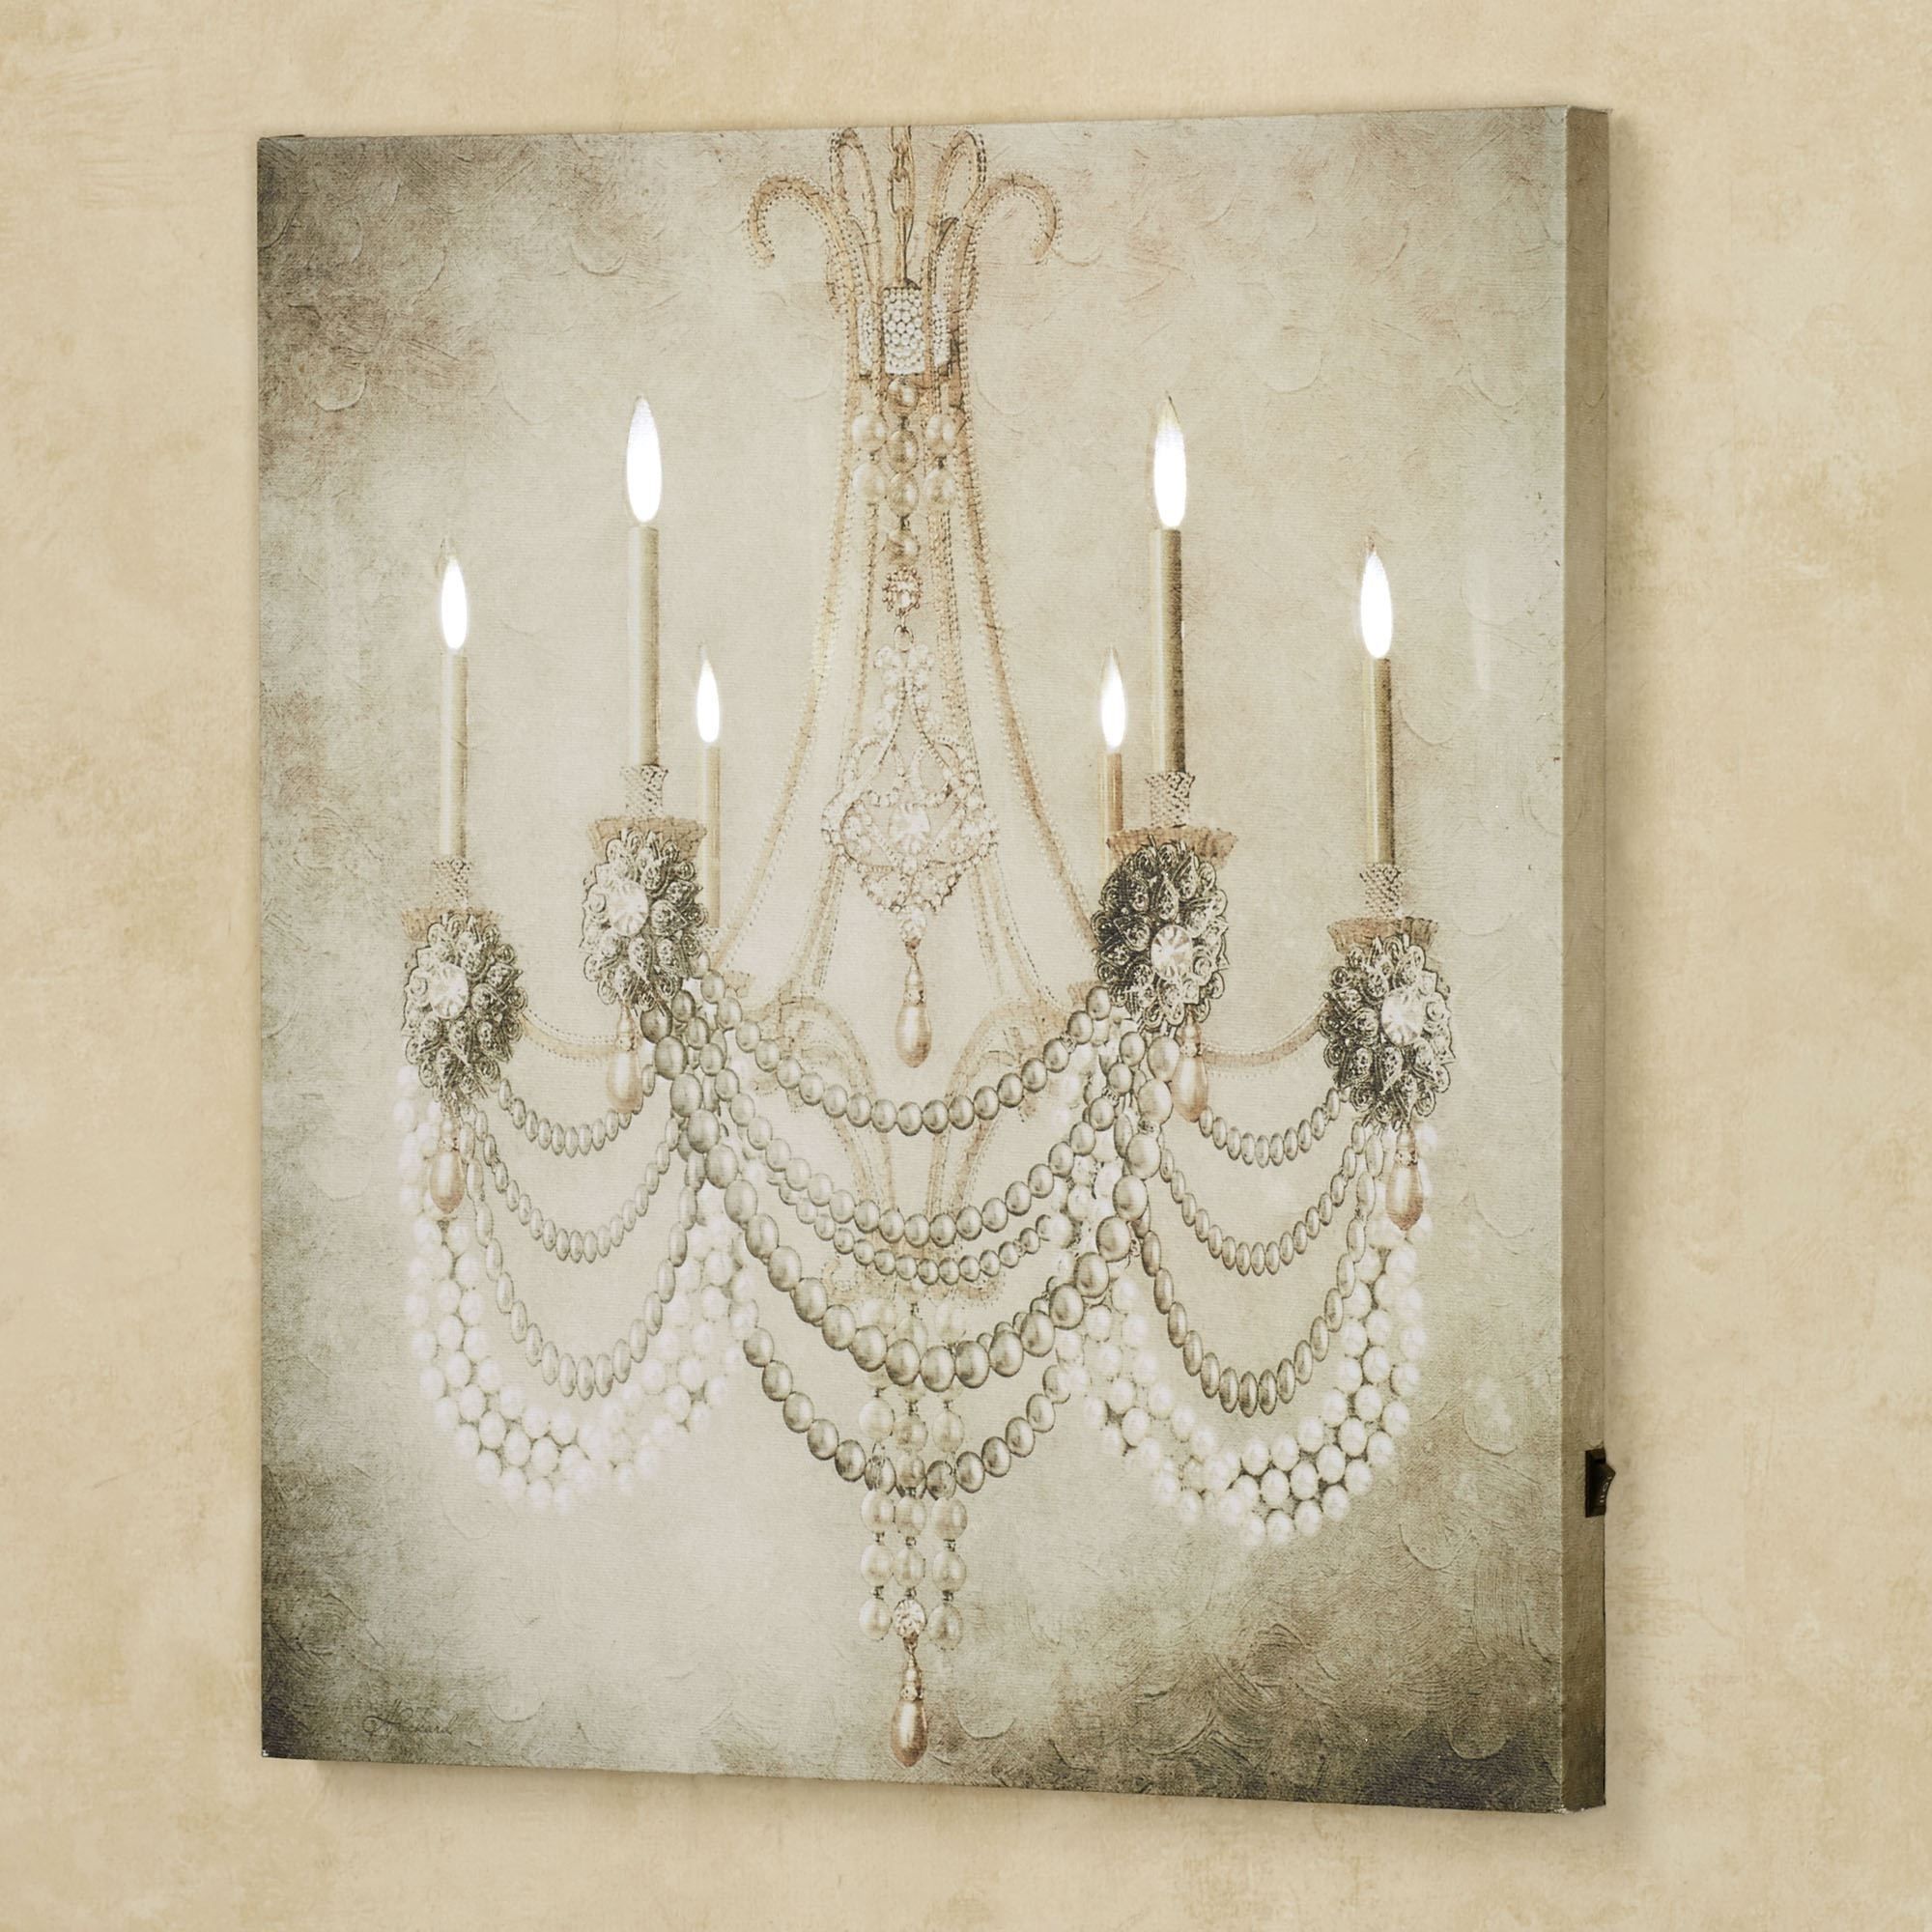 Vintage Chandelier Led Lighted Canvas Art Intended For Lighted Wall Art (View 7 of 20)